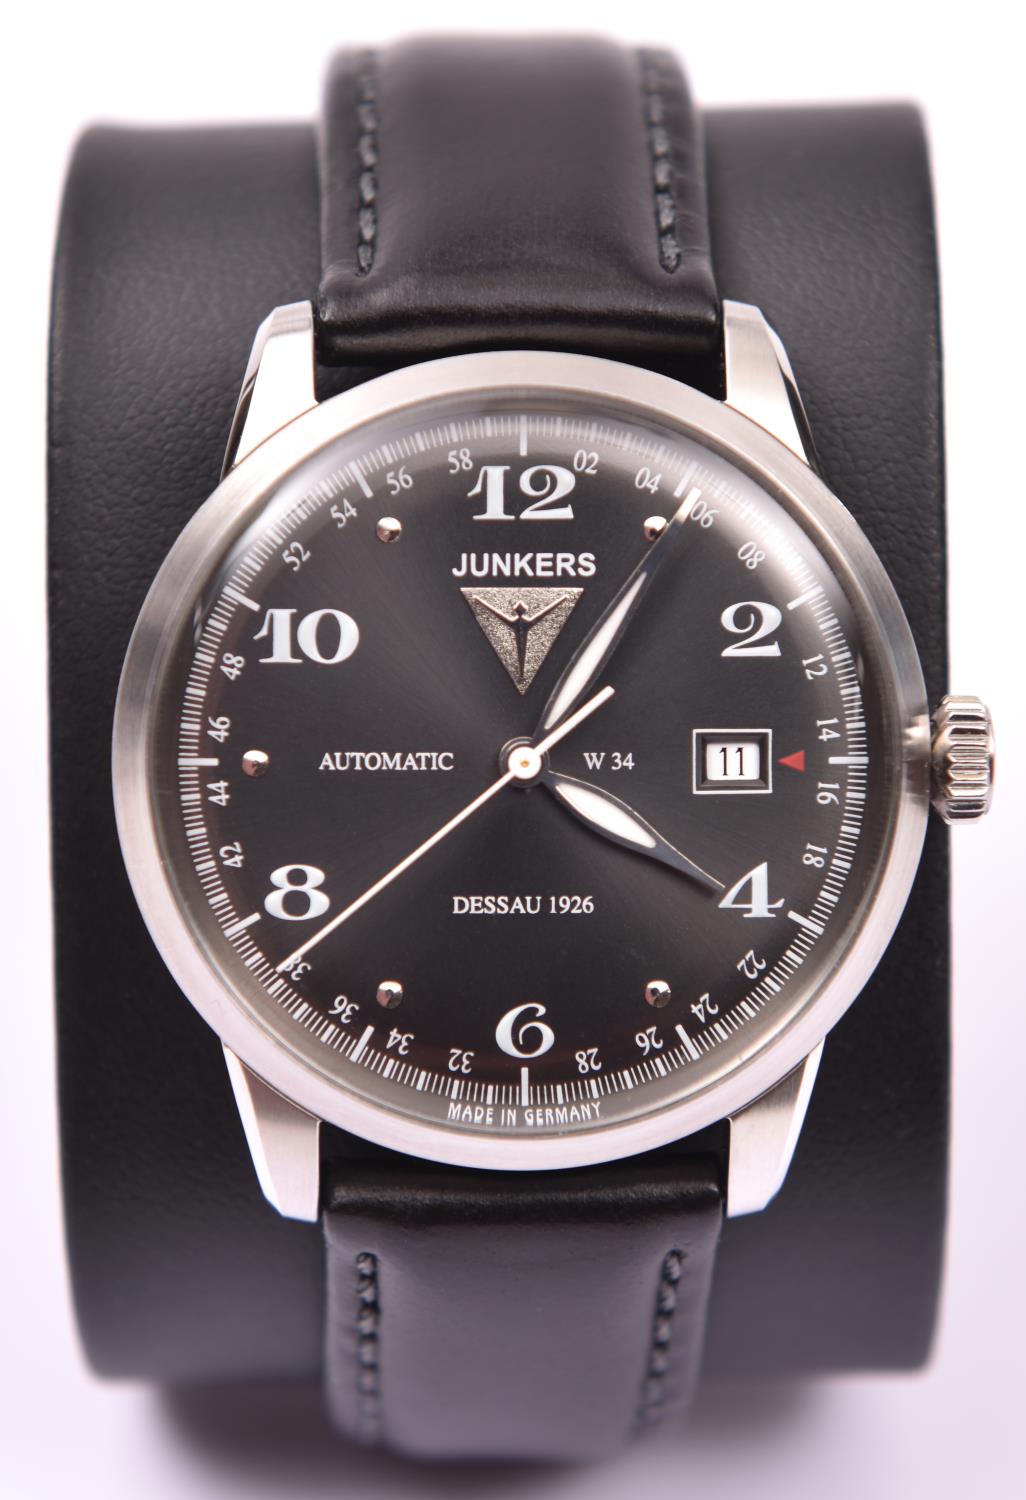 A Junkers Dessau 1926 W34 Automatic watch with automatic self winding mechanism. (6350/3400). With